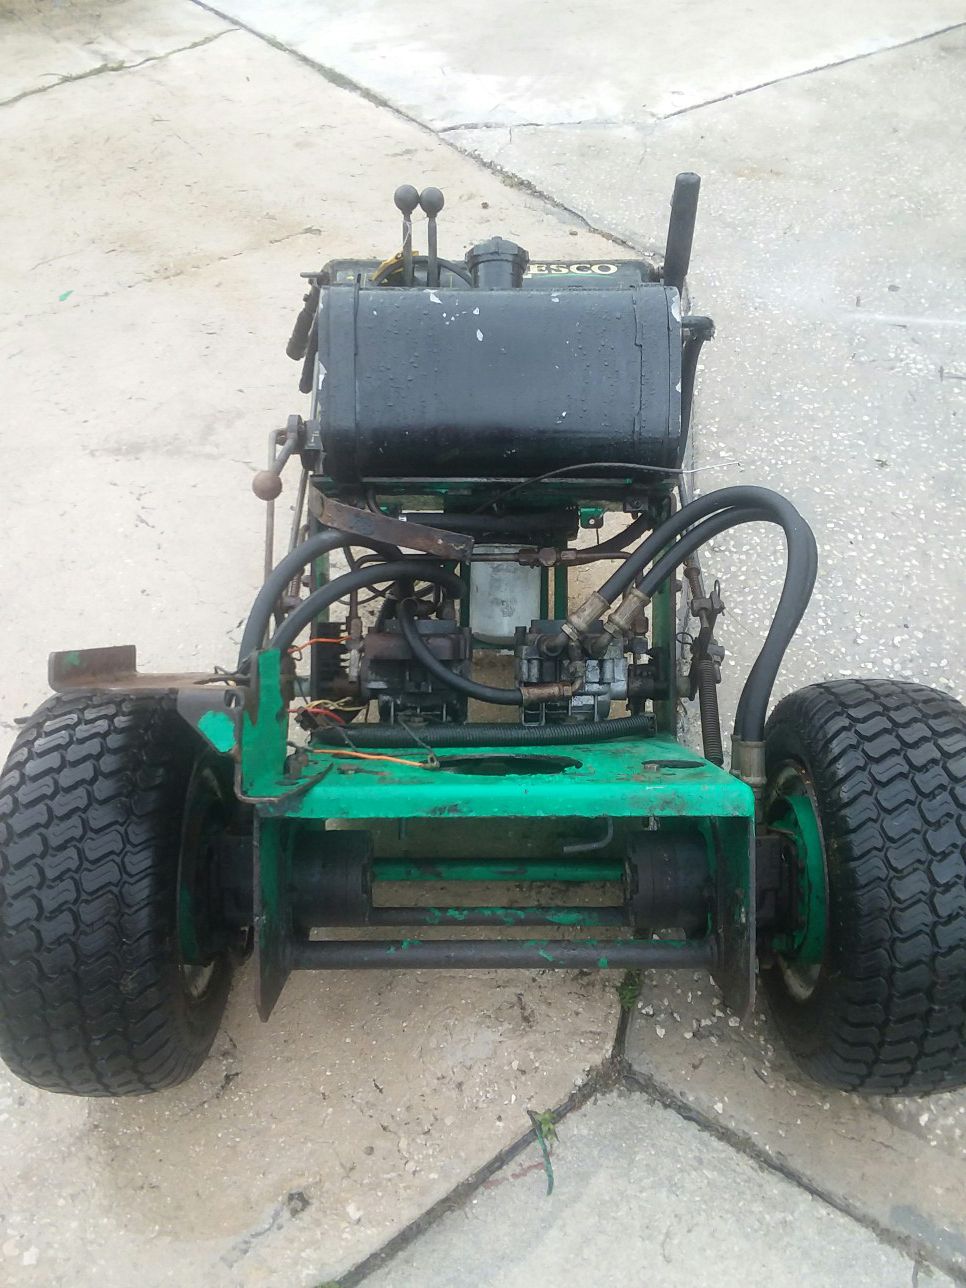 LESCO LAWNMOWER (PARTS ONLY NO ENGINE- BLEW ENGINE)